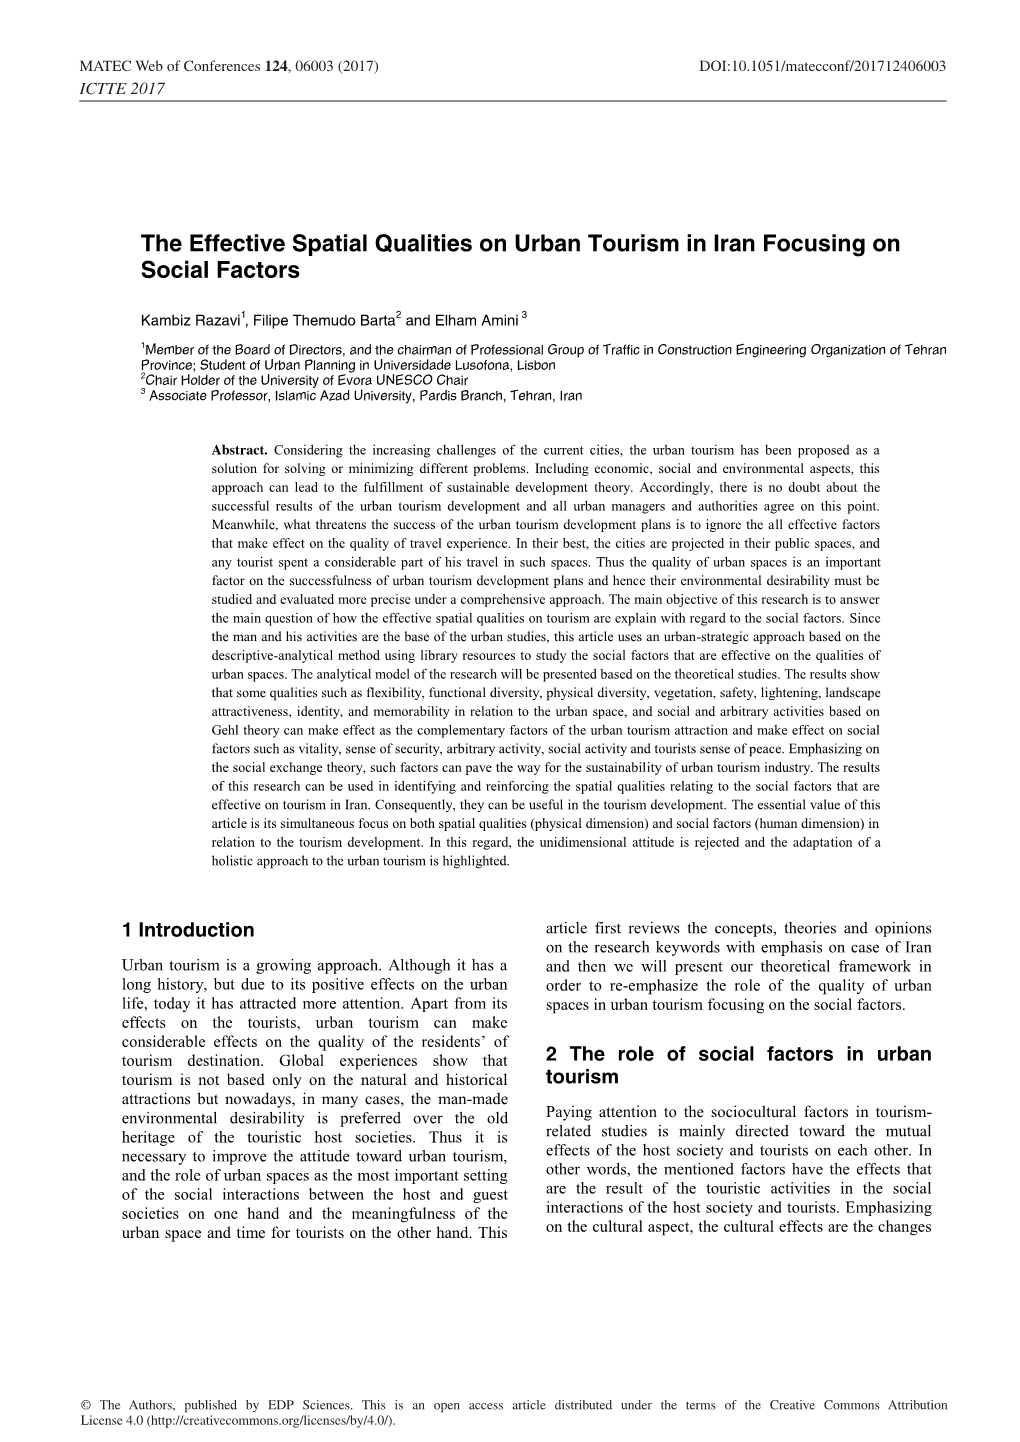 The Effective Spatial Qualities on Urban Tourism in Iran Focusing on Social Factors